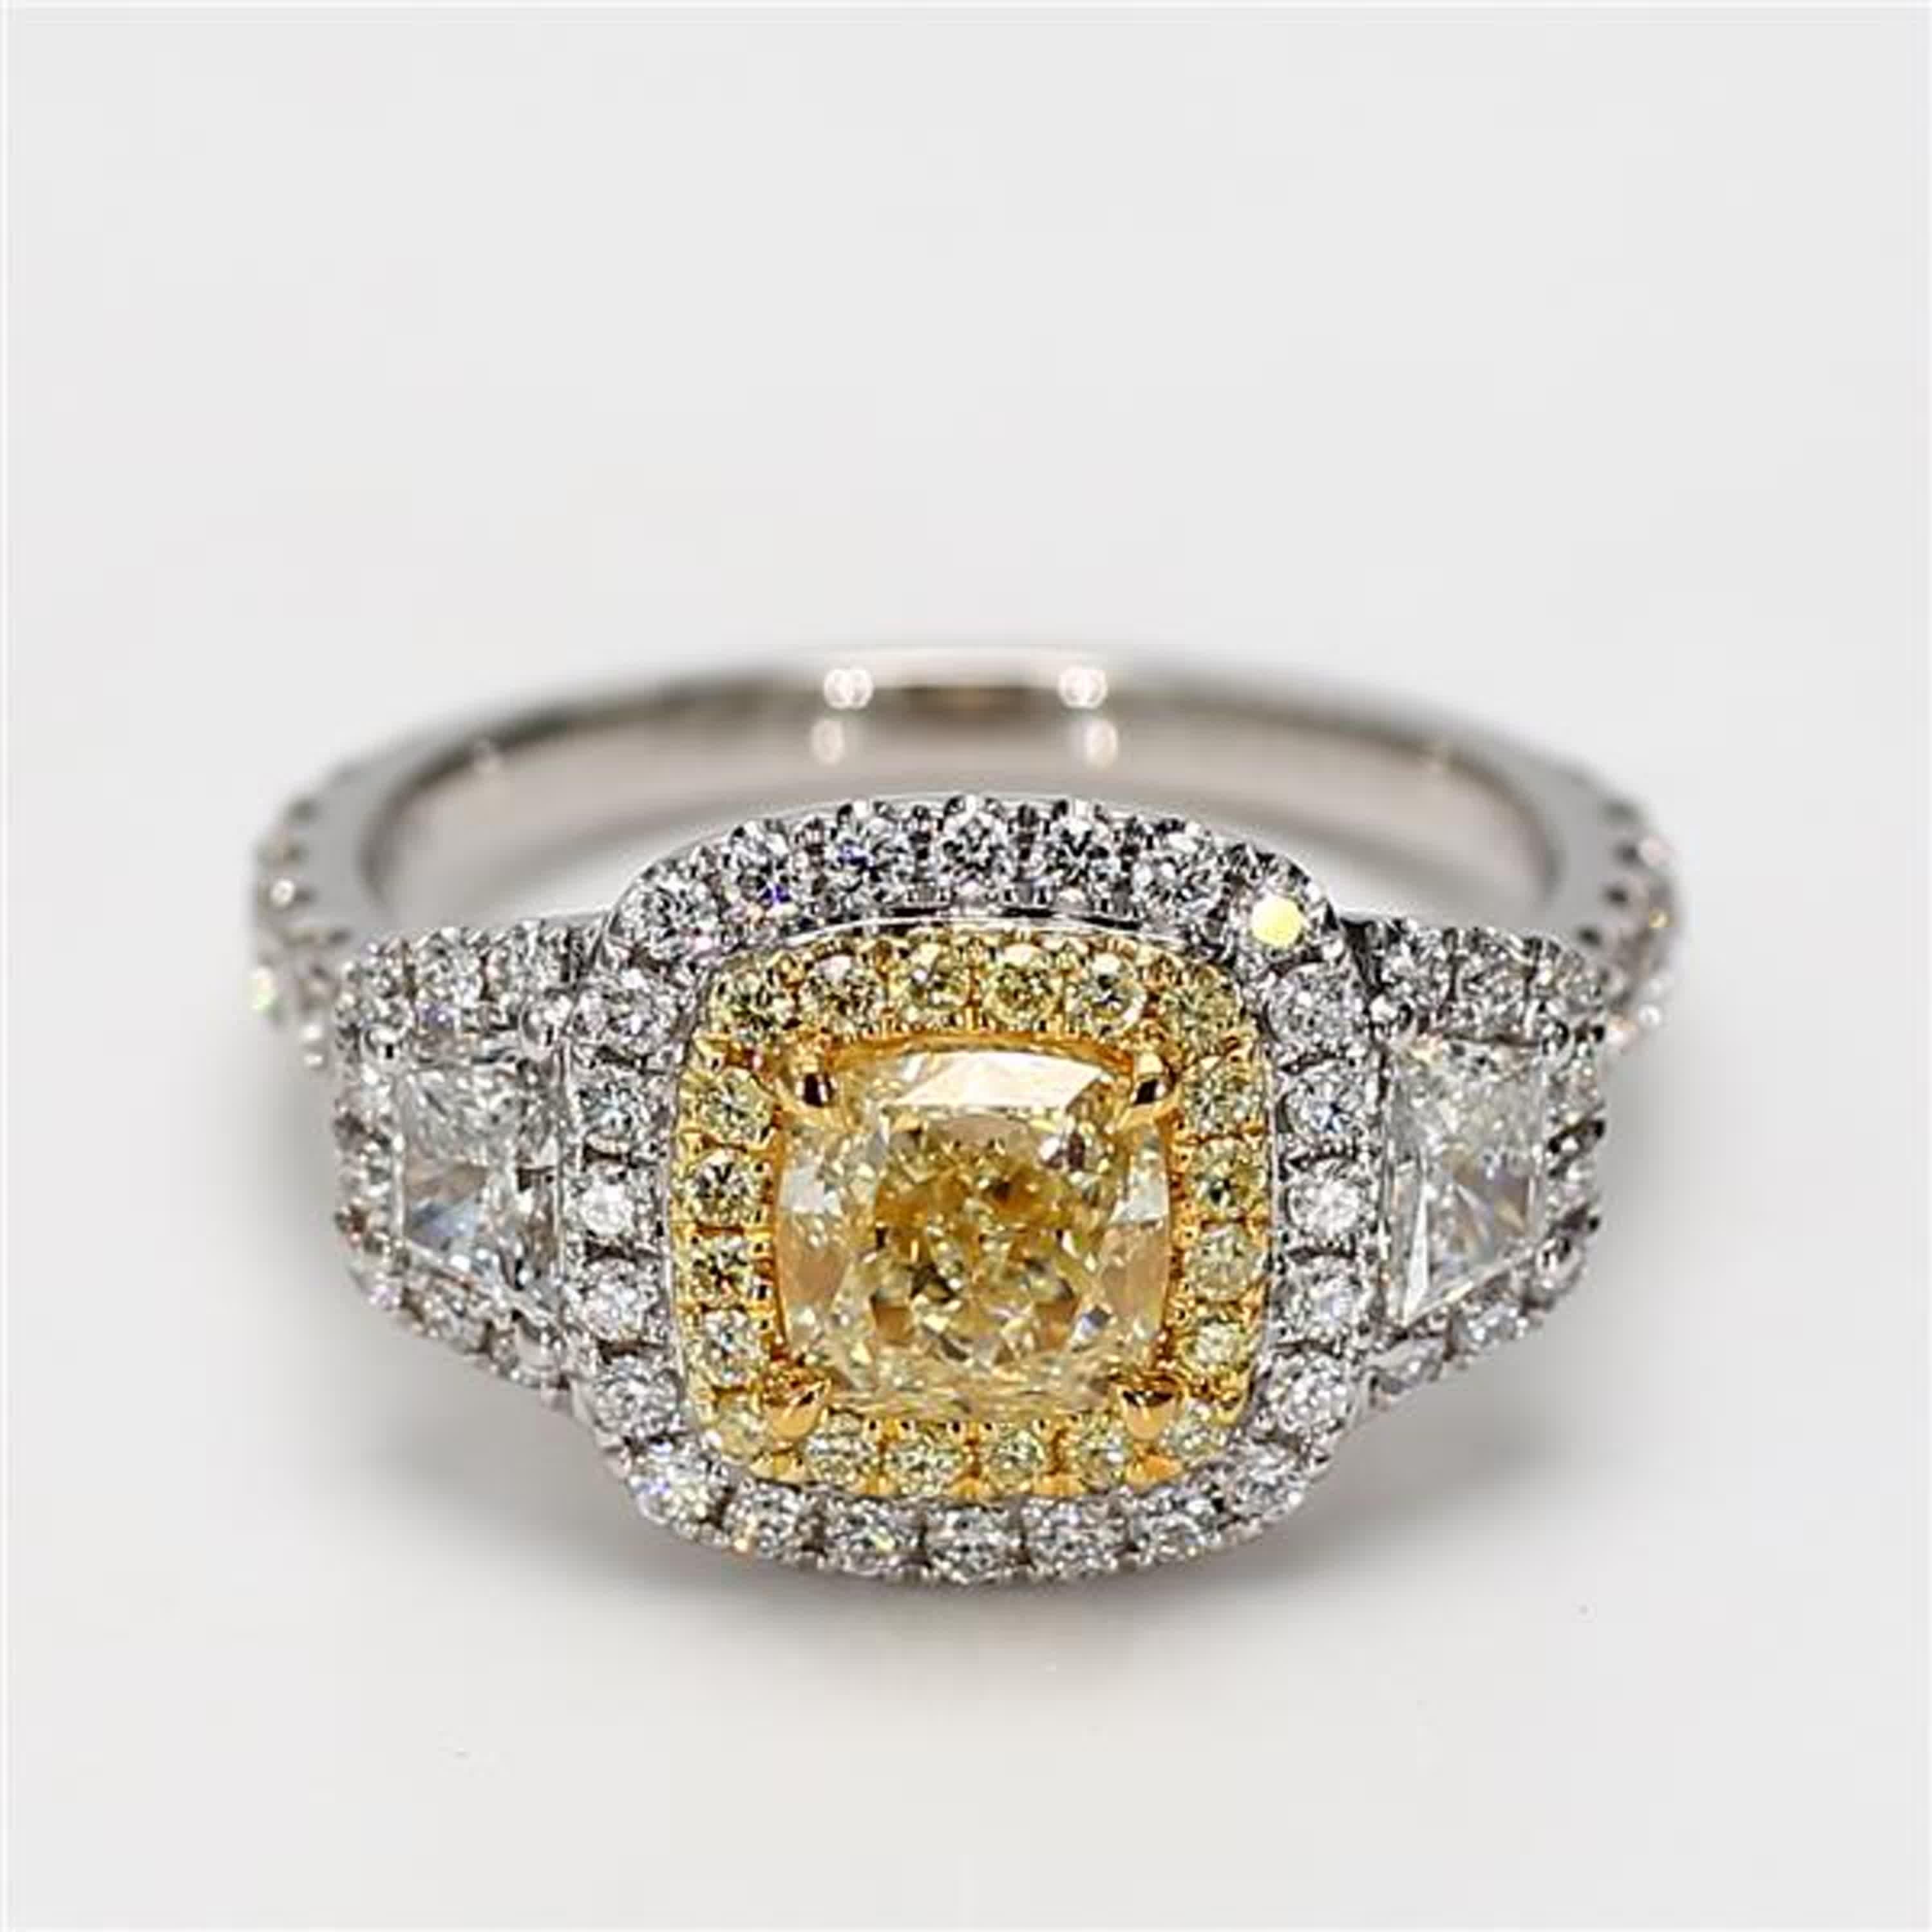 RareGemWorld's classic GIA certified diamond ring. Mounted in a beautiful 18K Yellow and White Gold setting with a natural cushion cut yellow diamond. The yellow diamond is surrounded by natural taper baguette white diamonds, round natural yellow